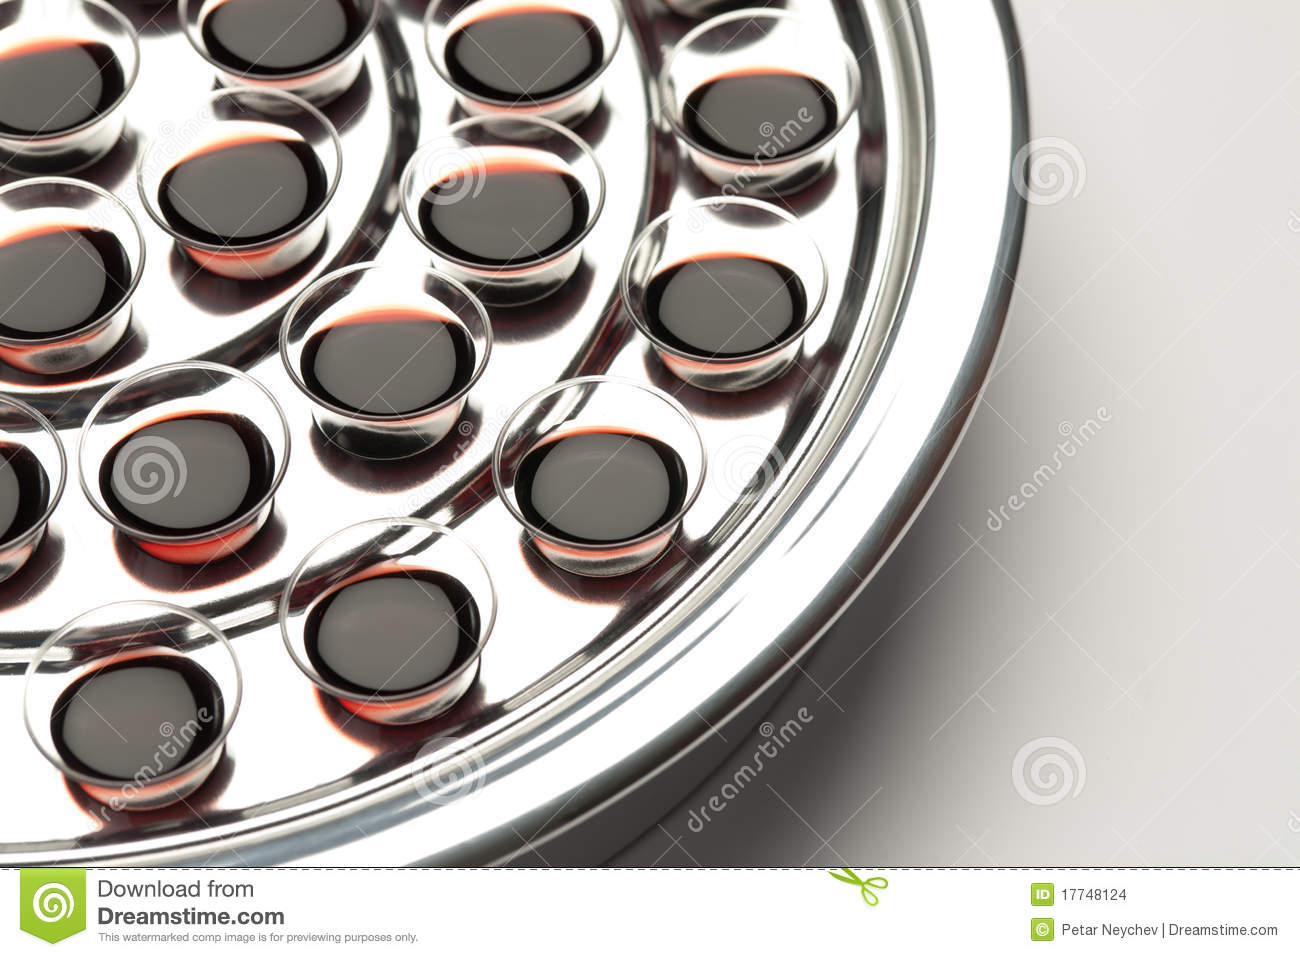     Of The Blood Of Jesus   Communion Cups With Wine Arranged In A Tray